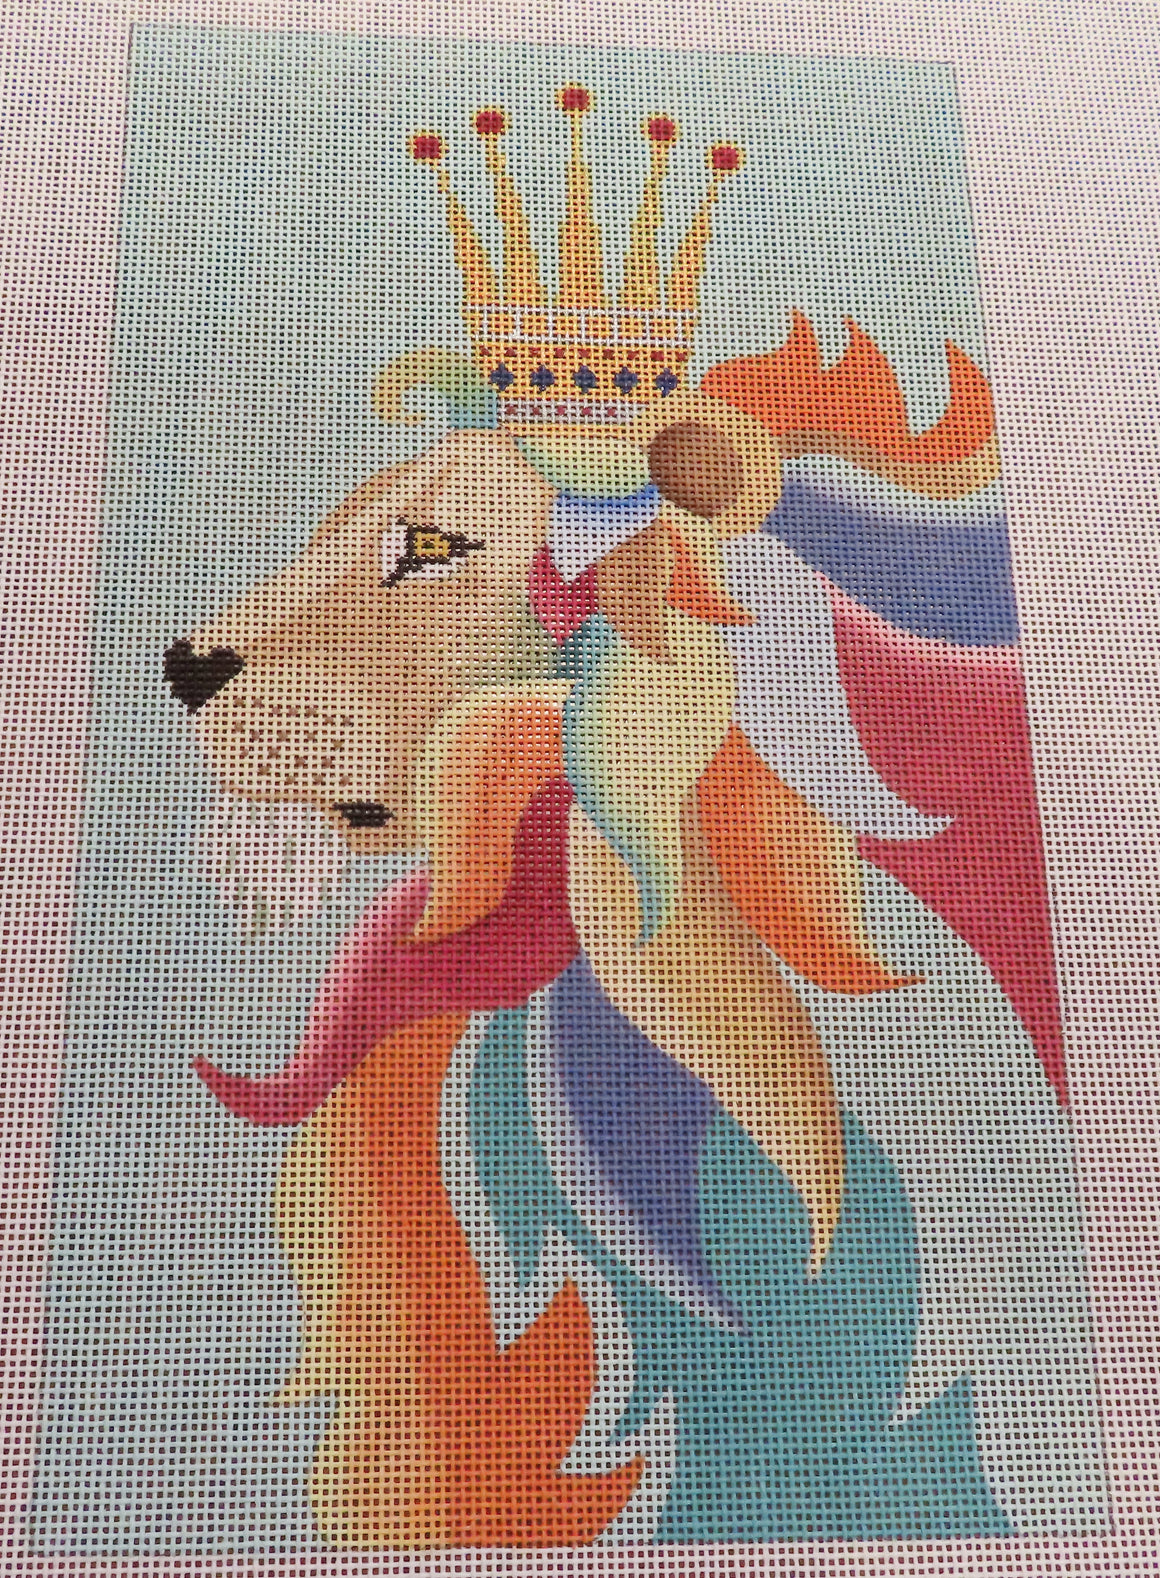 Lion with Jeweled Crown